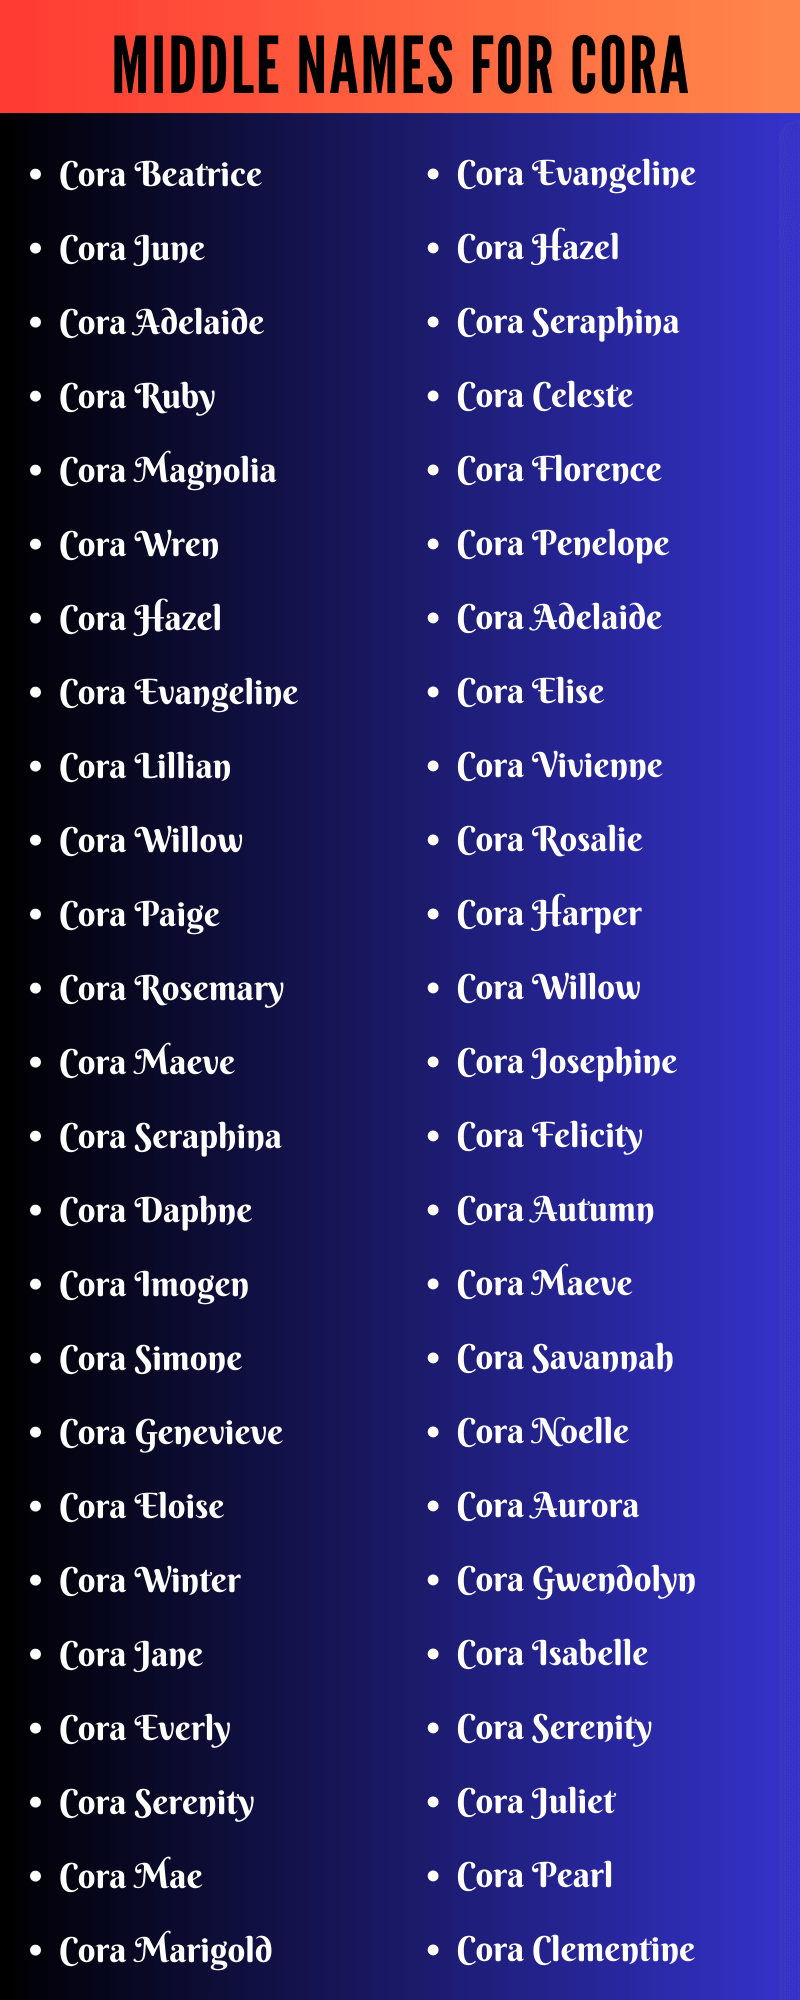 Middle Names For Cora